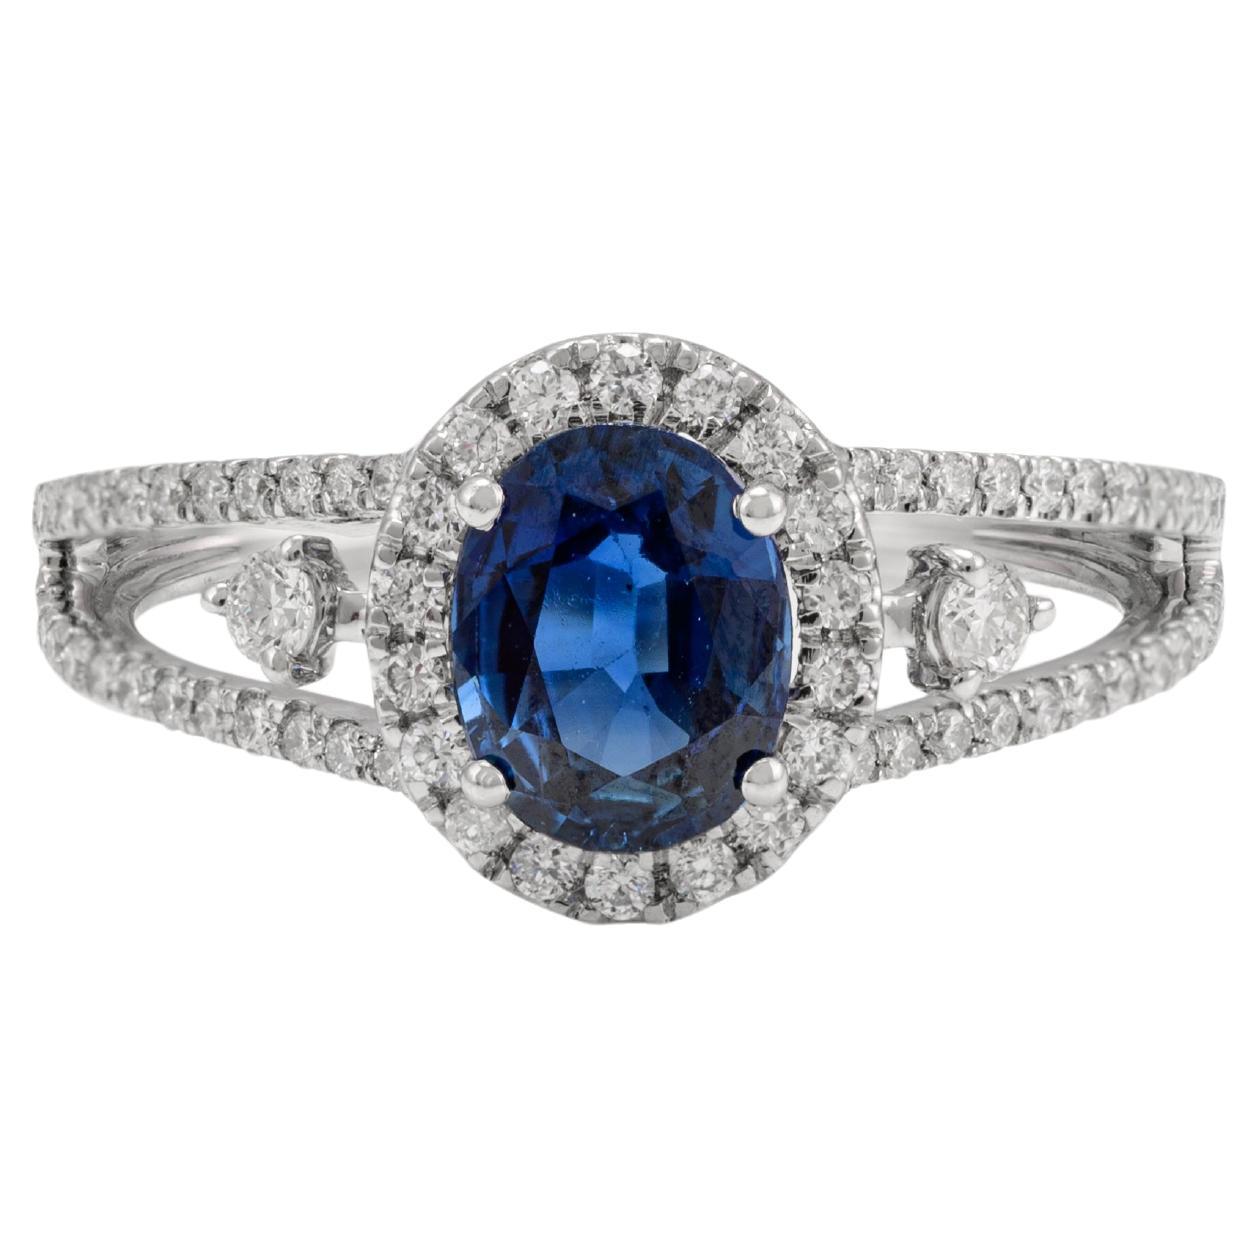 For Sale:  Certified Diamond and Oval Blue Sapphire Engagement Ring 18k Solid White Gold